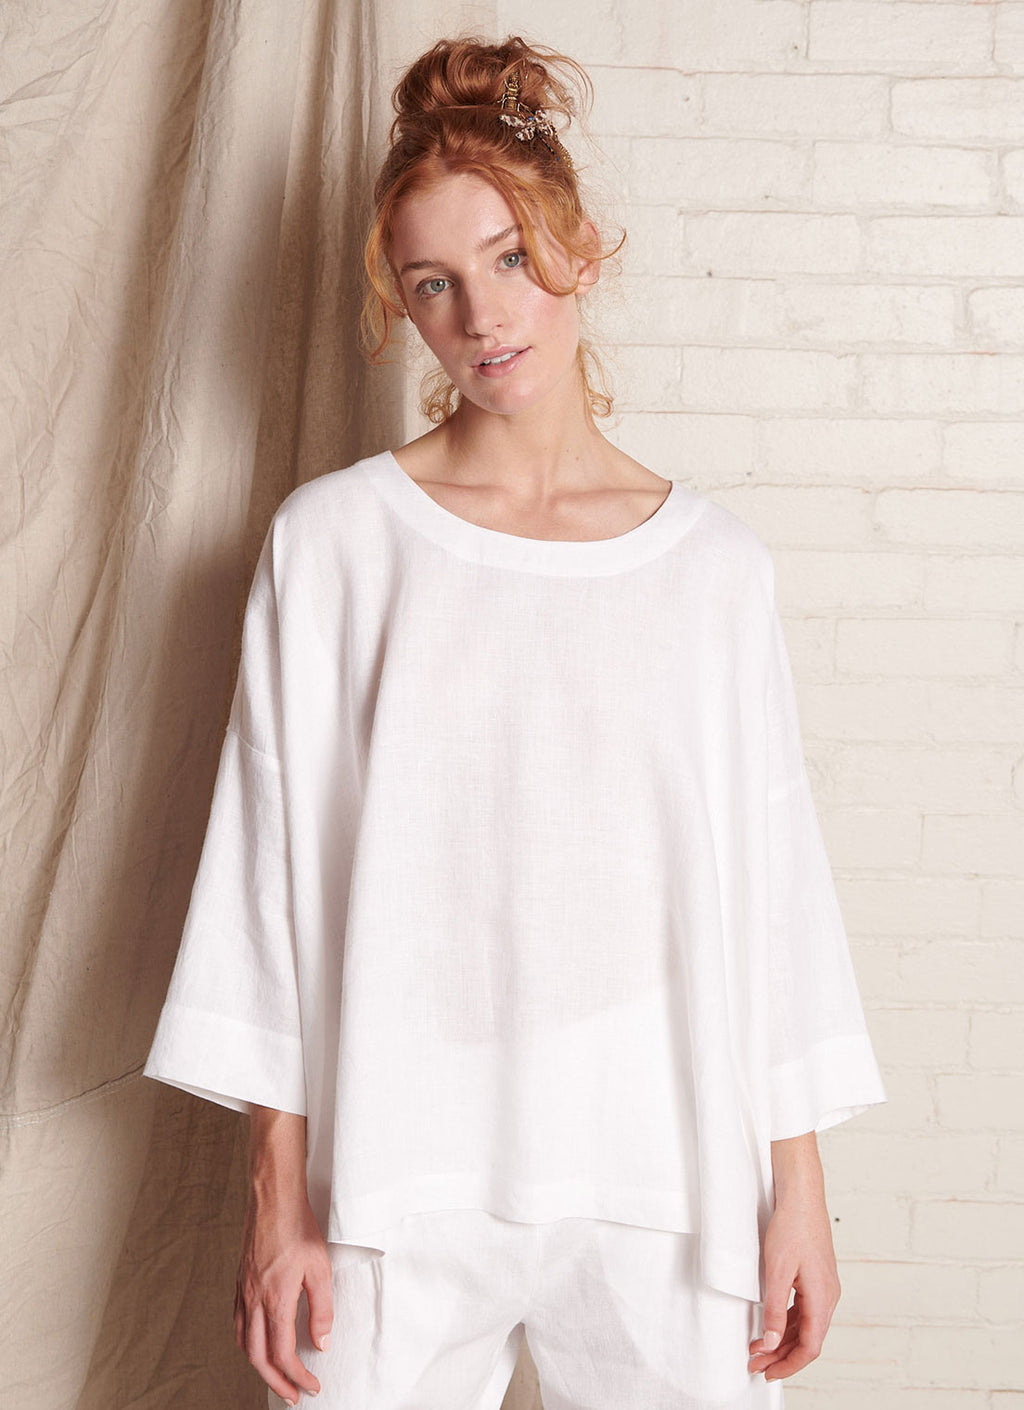 A white, easy fit top with round neckline, long sleeves and embroidered detail at the back made from European pure linen